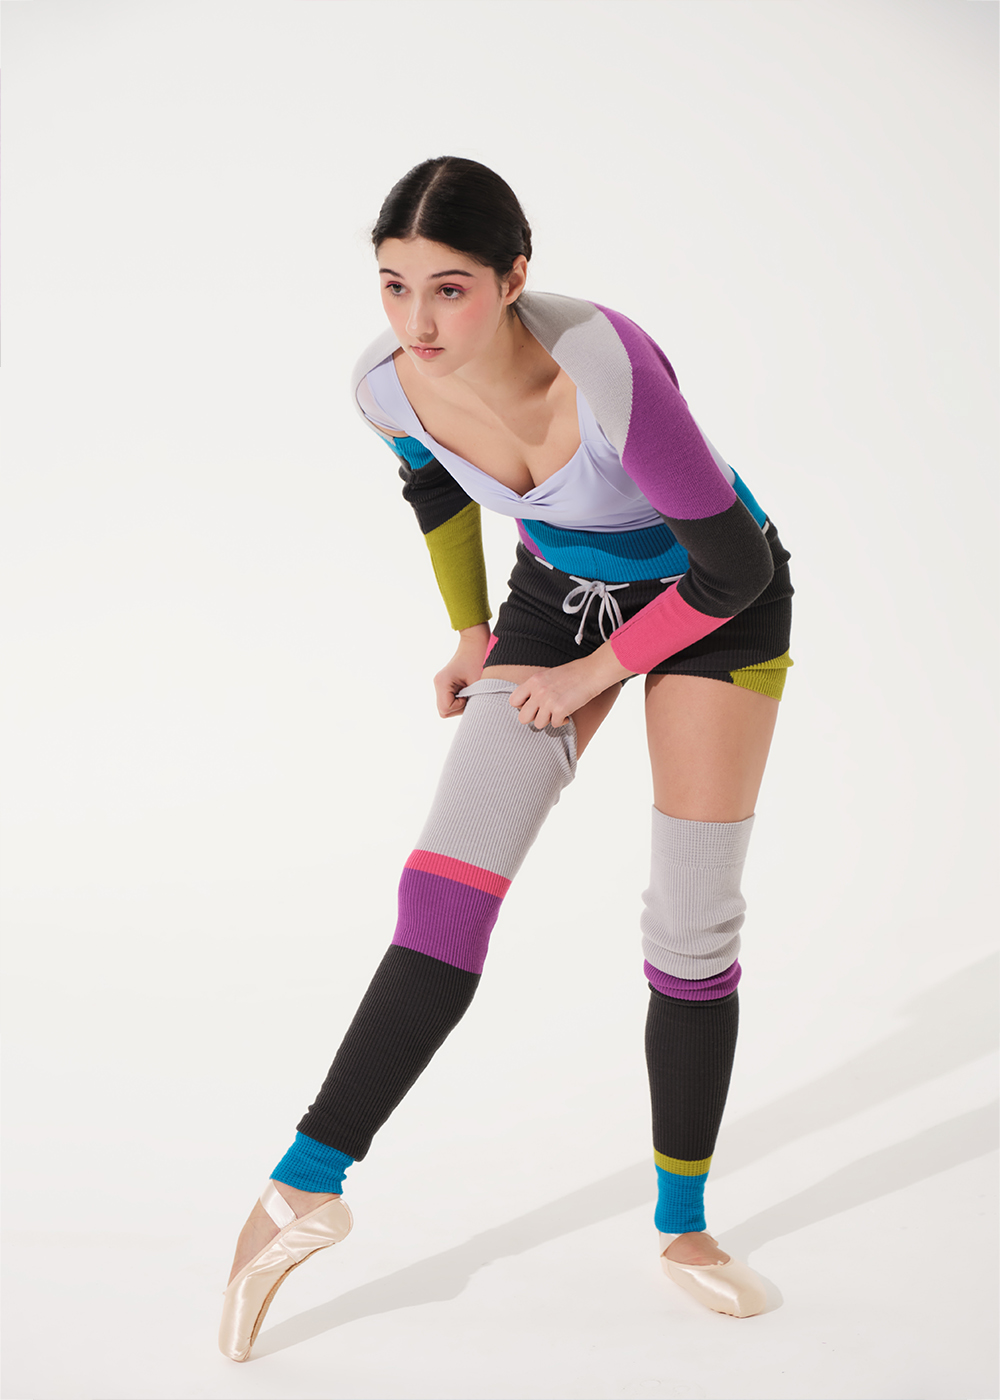 KEELY, Long leg warmers, 31.5” (06209/3N)  Nikolay® - official online shop  of pointe shoes and dance apparel in the USA